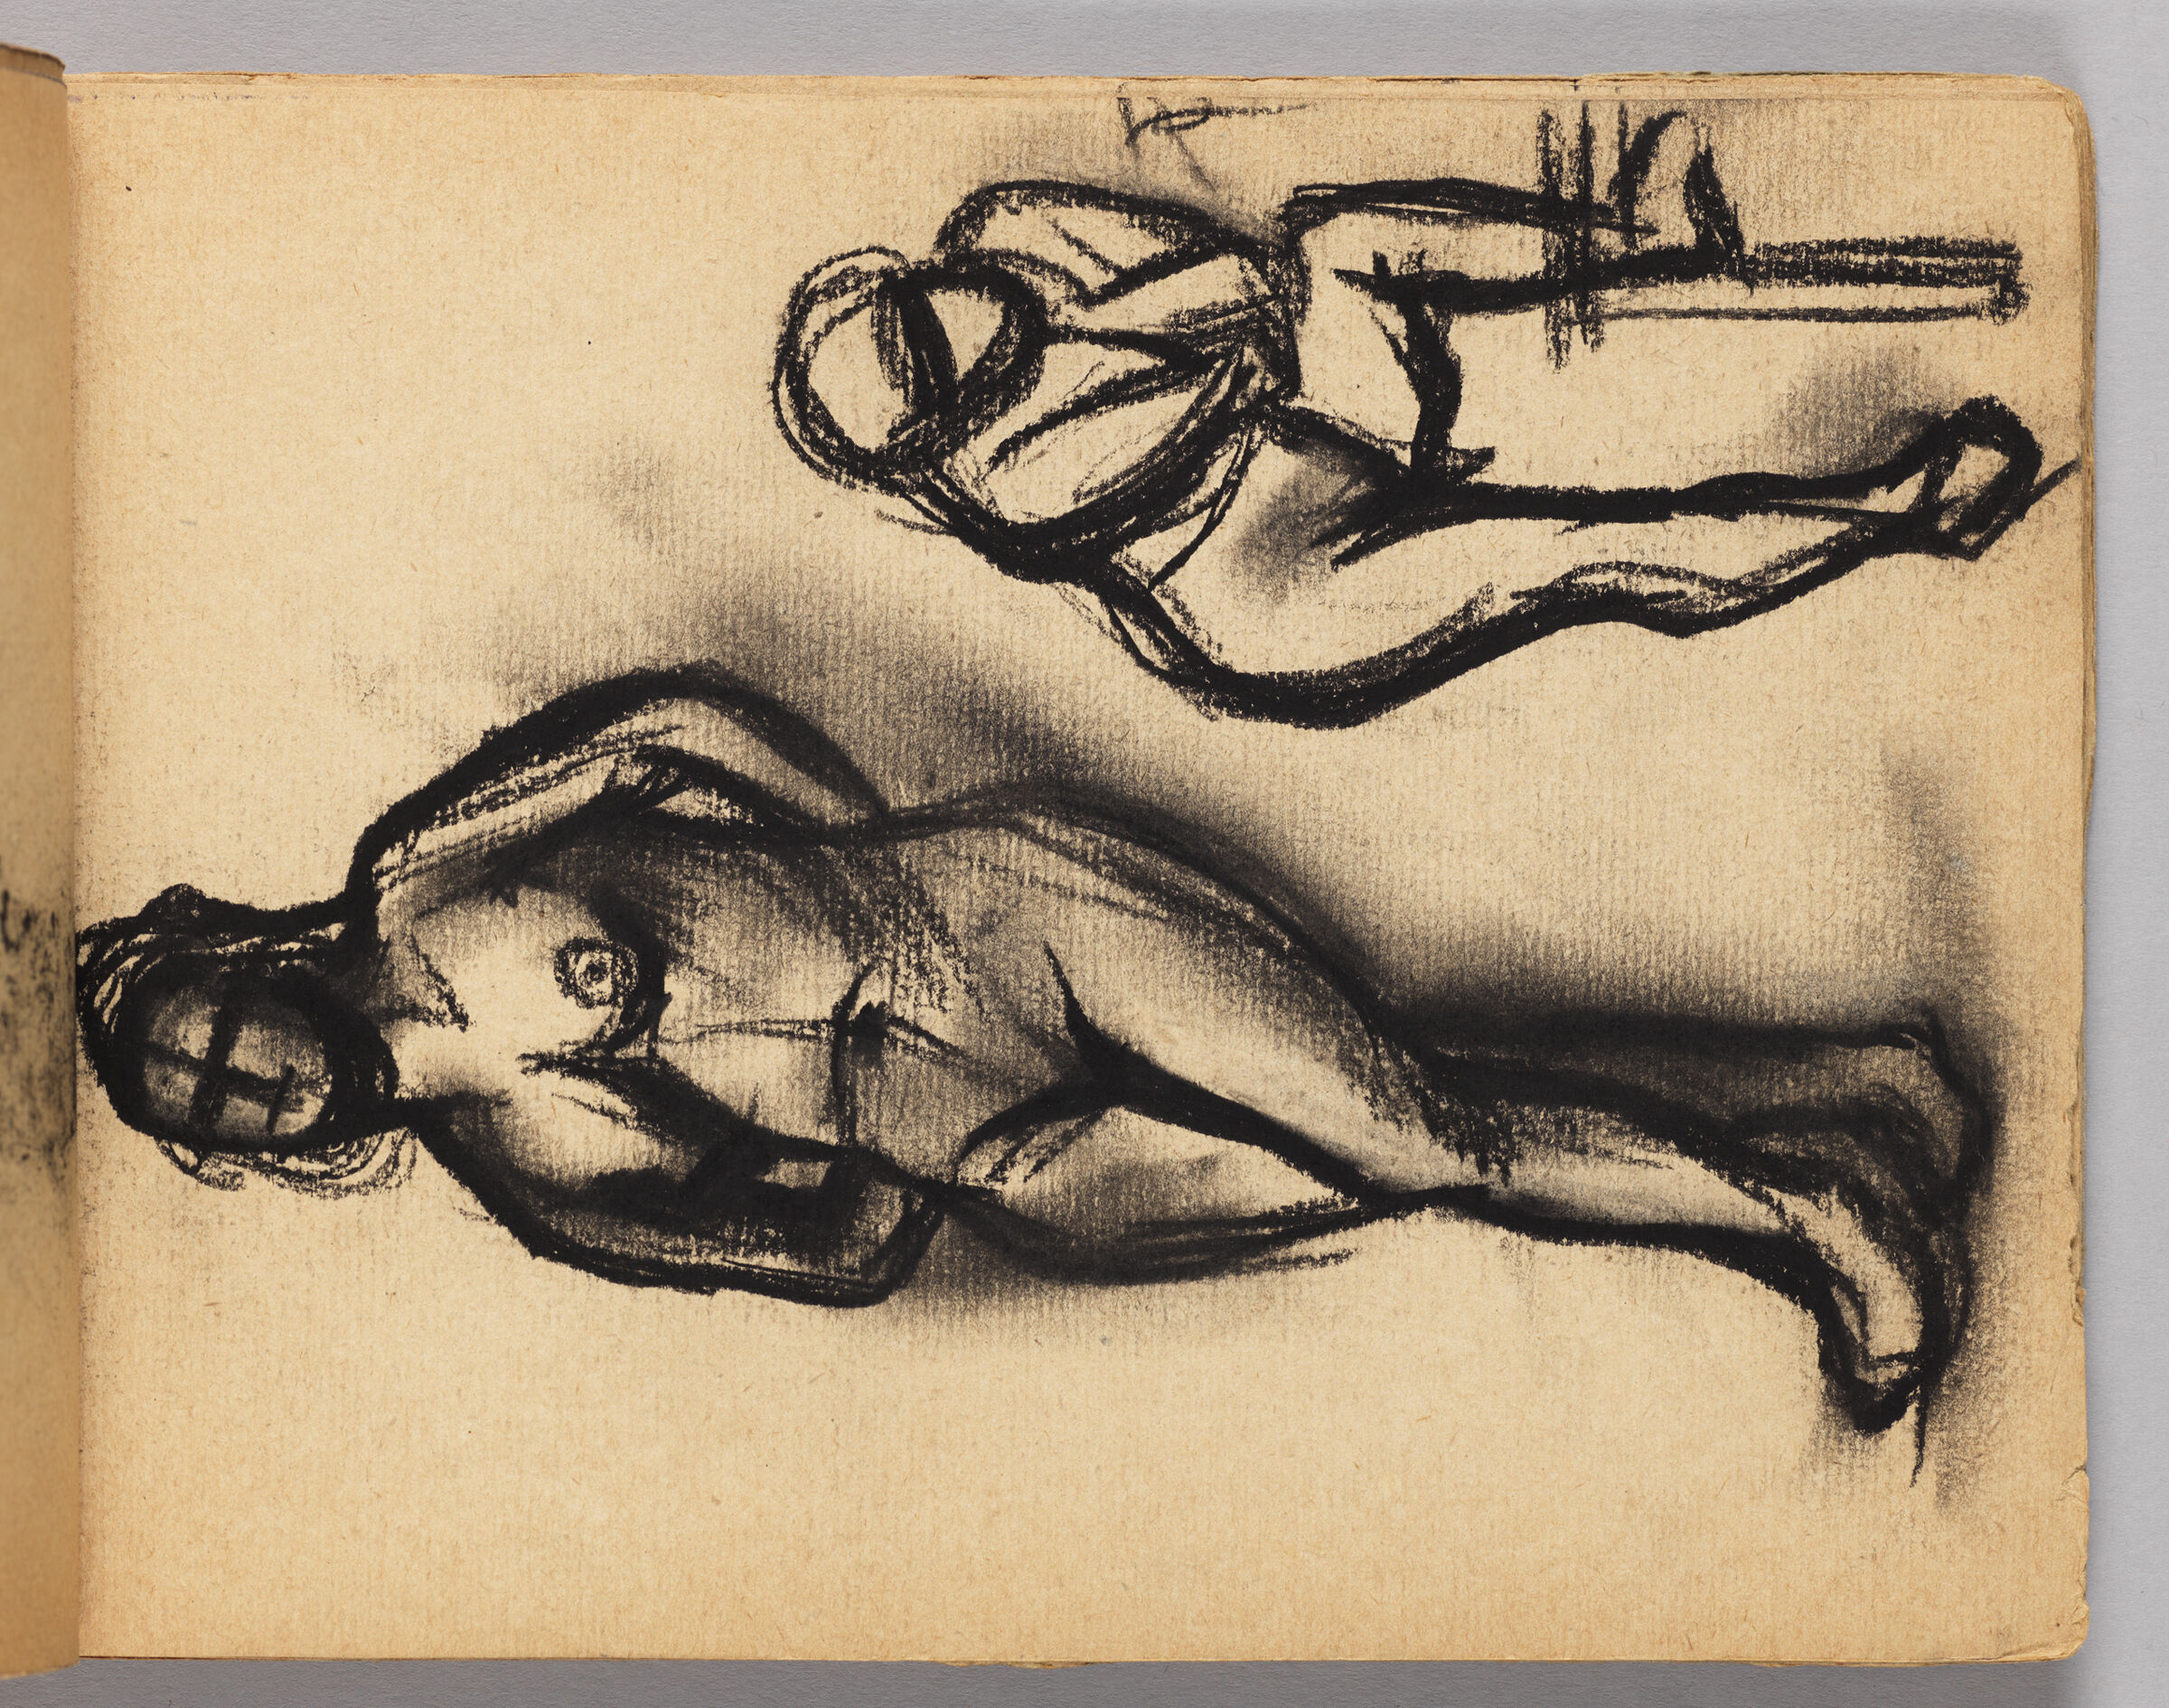 Untitled (Charcoal Transfer, Left Page); Untitled (Two Nude Female Figure Studies, Right Page)